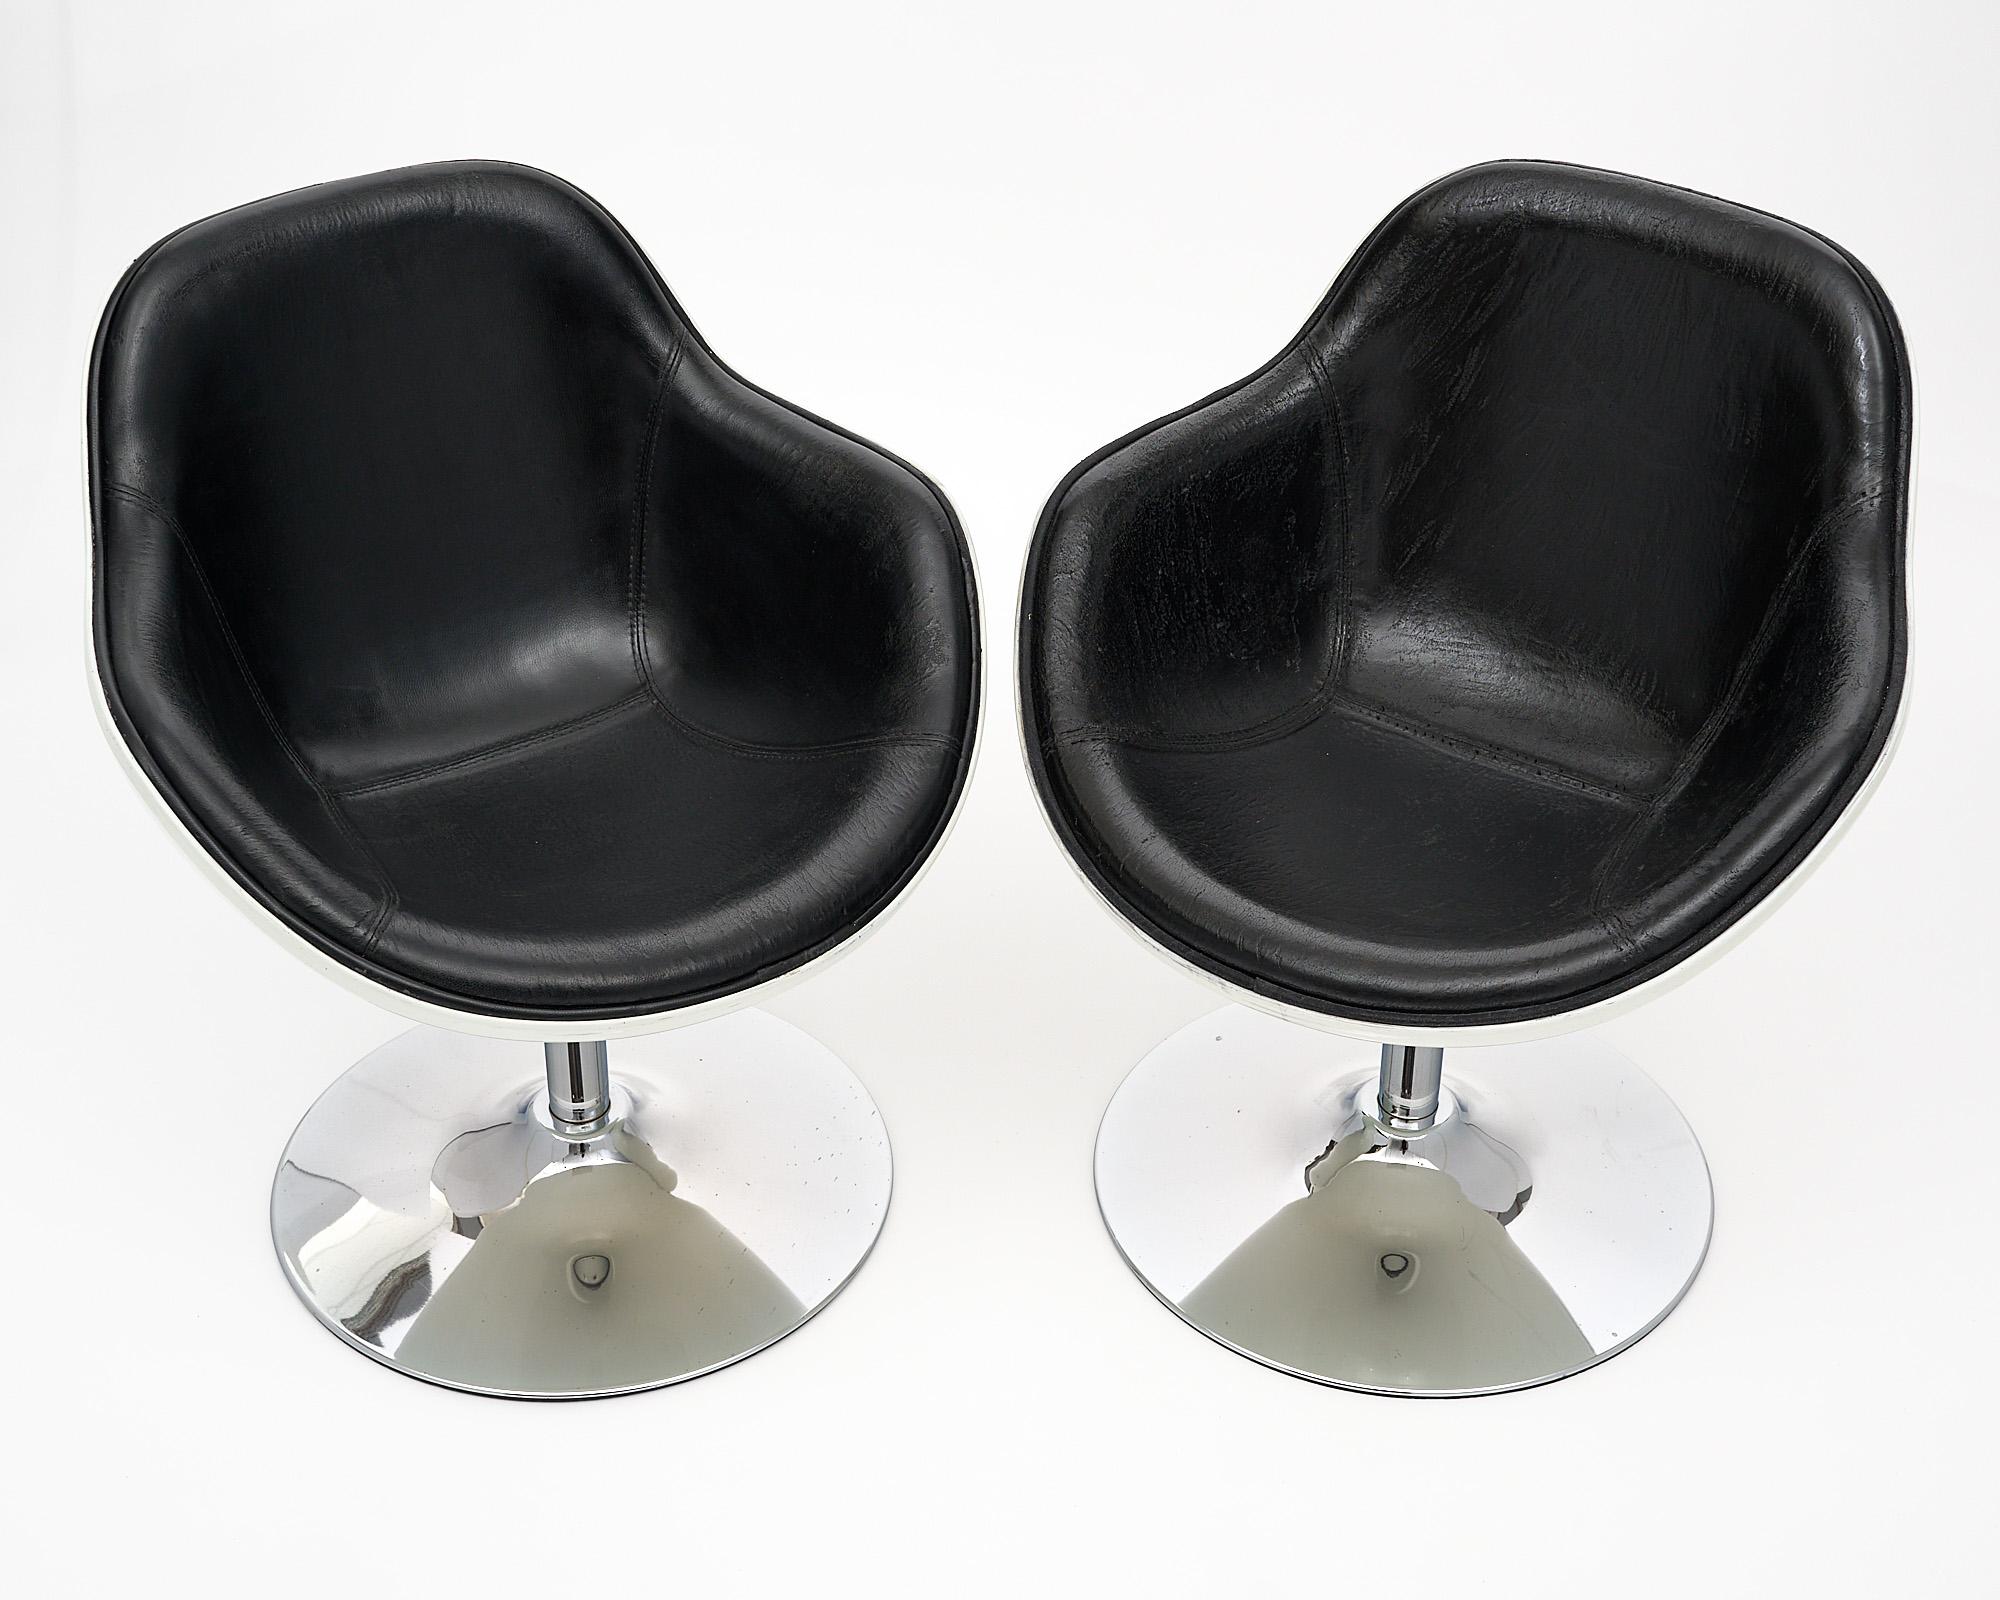 Pair of armchairs in the French modernist style. The vintage armchairs feature an ivory polyurethane shell with an original black vinyl upholstery inside. The armchairs swivel on a chromed steel center foot.